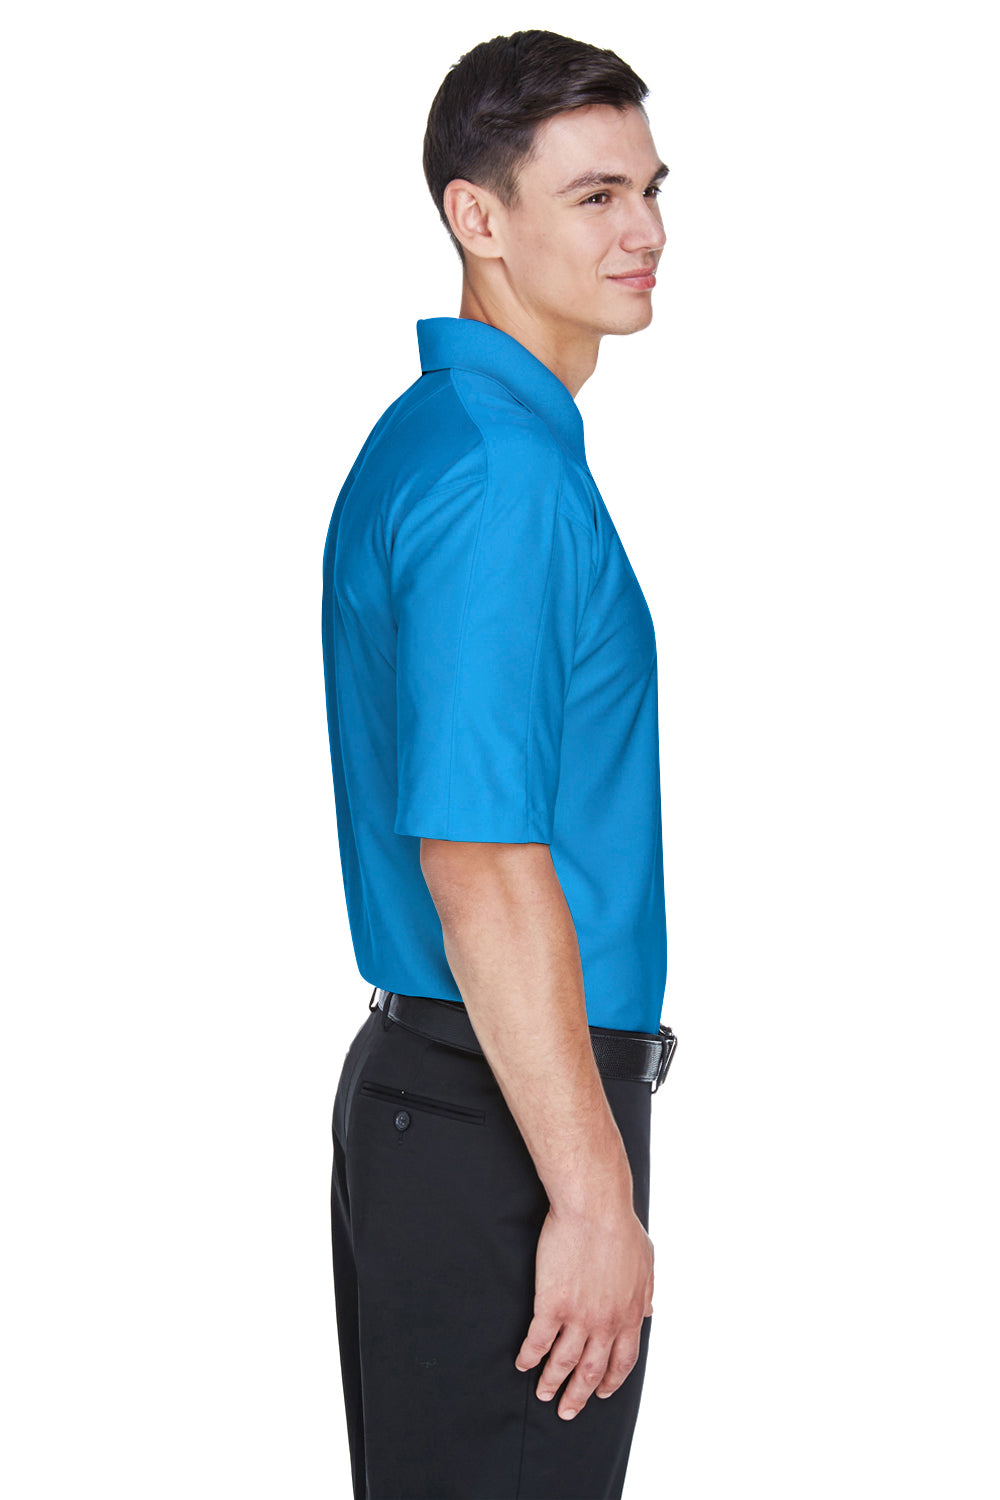 UltraClub 8415 Mens Cool & Dry Elite Performance Moisture Wicking Short Sleeve Polo Shirt Pacific Blue Side